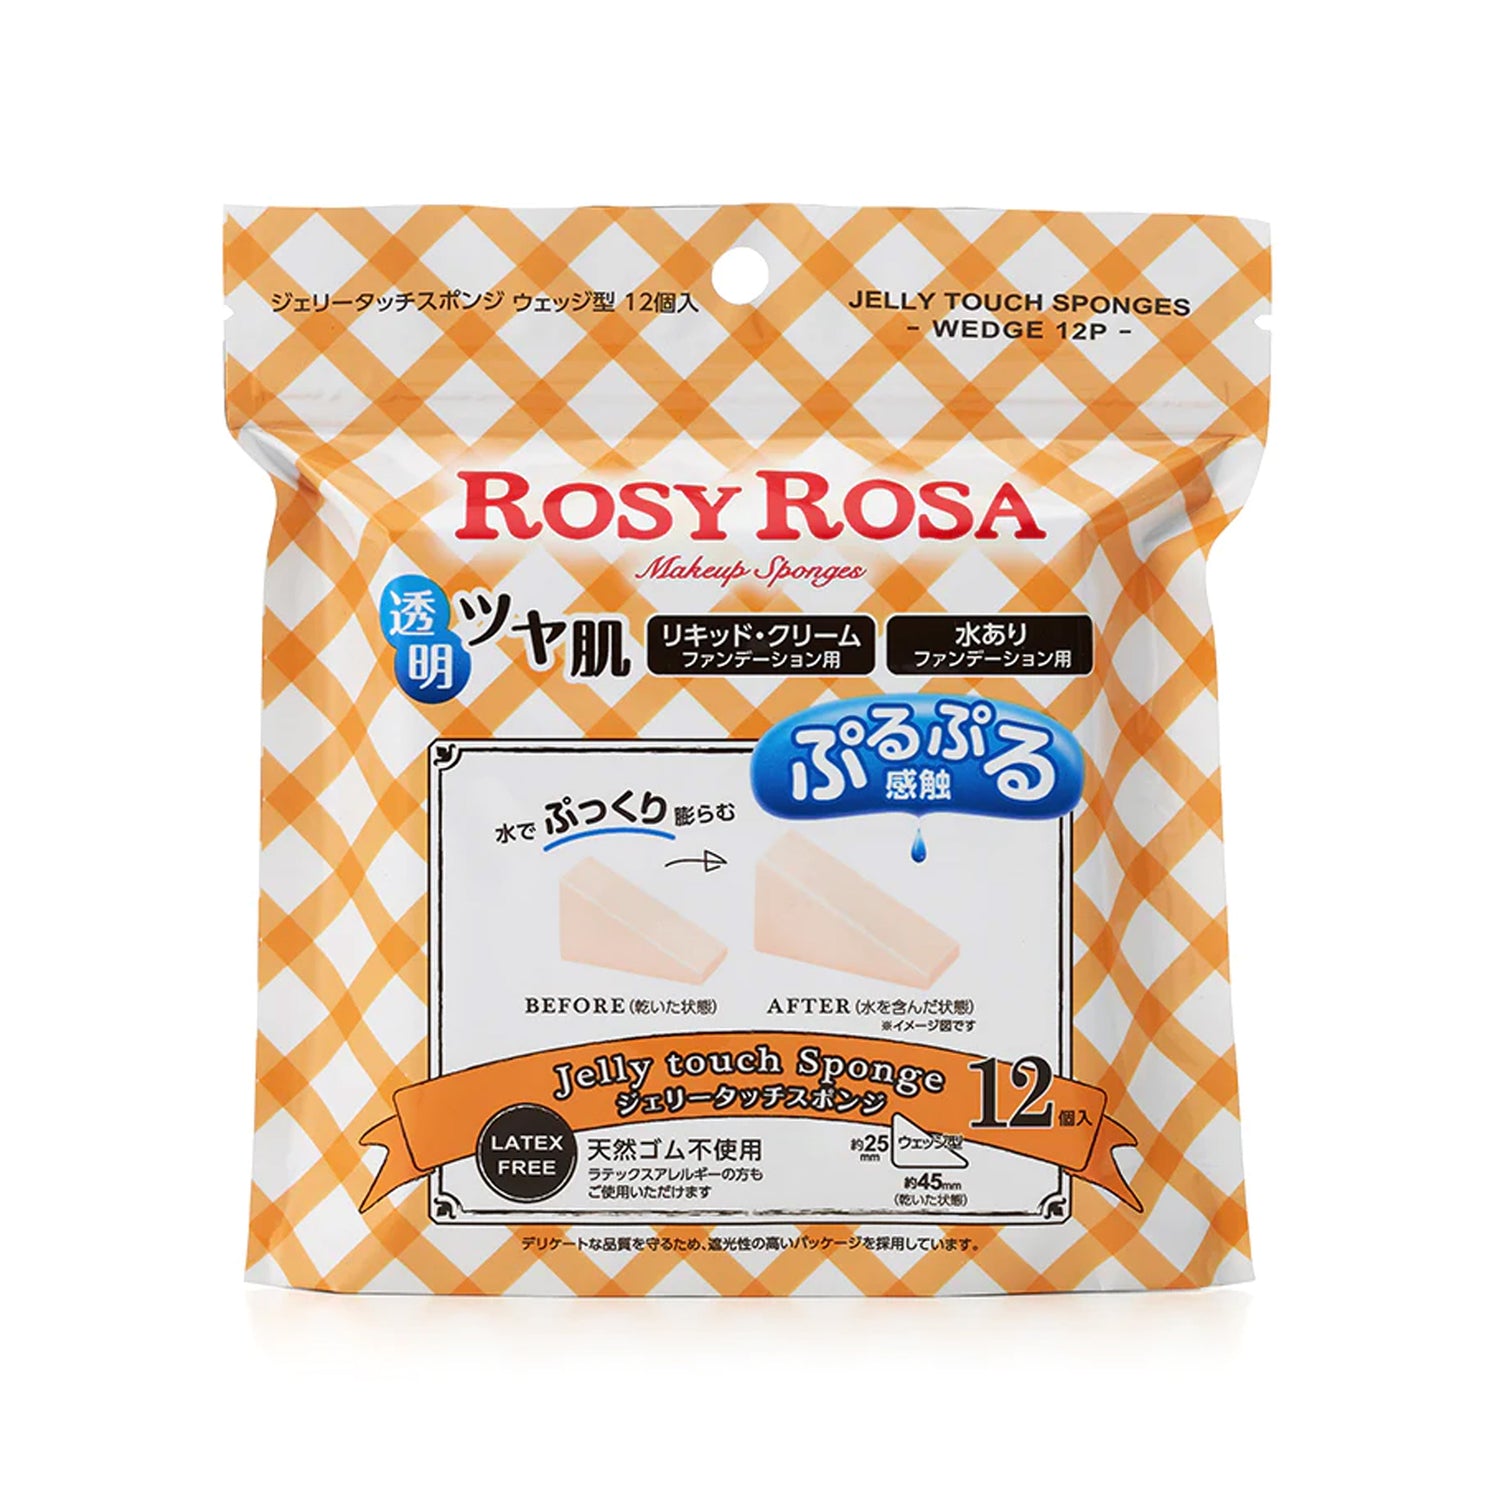 ROSY ROSA JELLY TOUCH SPONGE WEDGE 12P